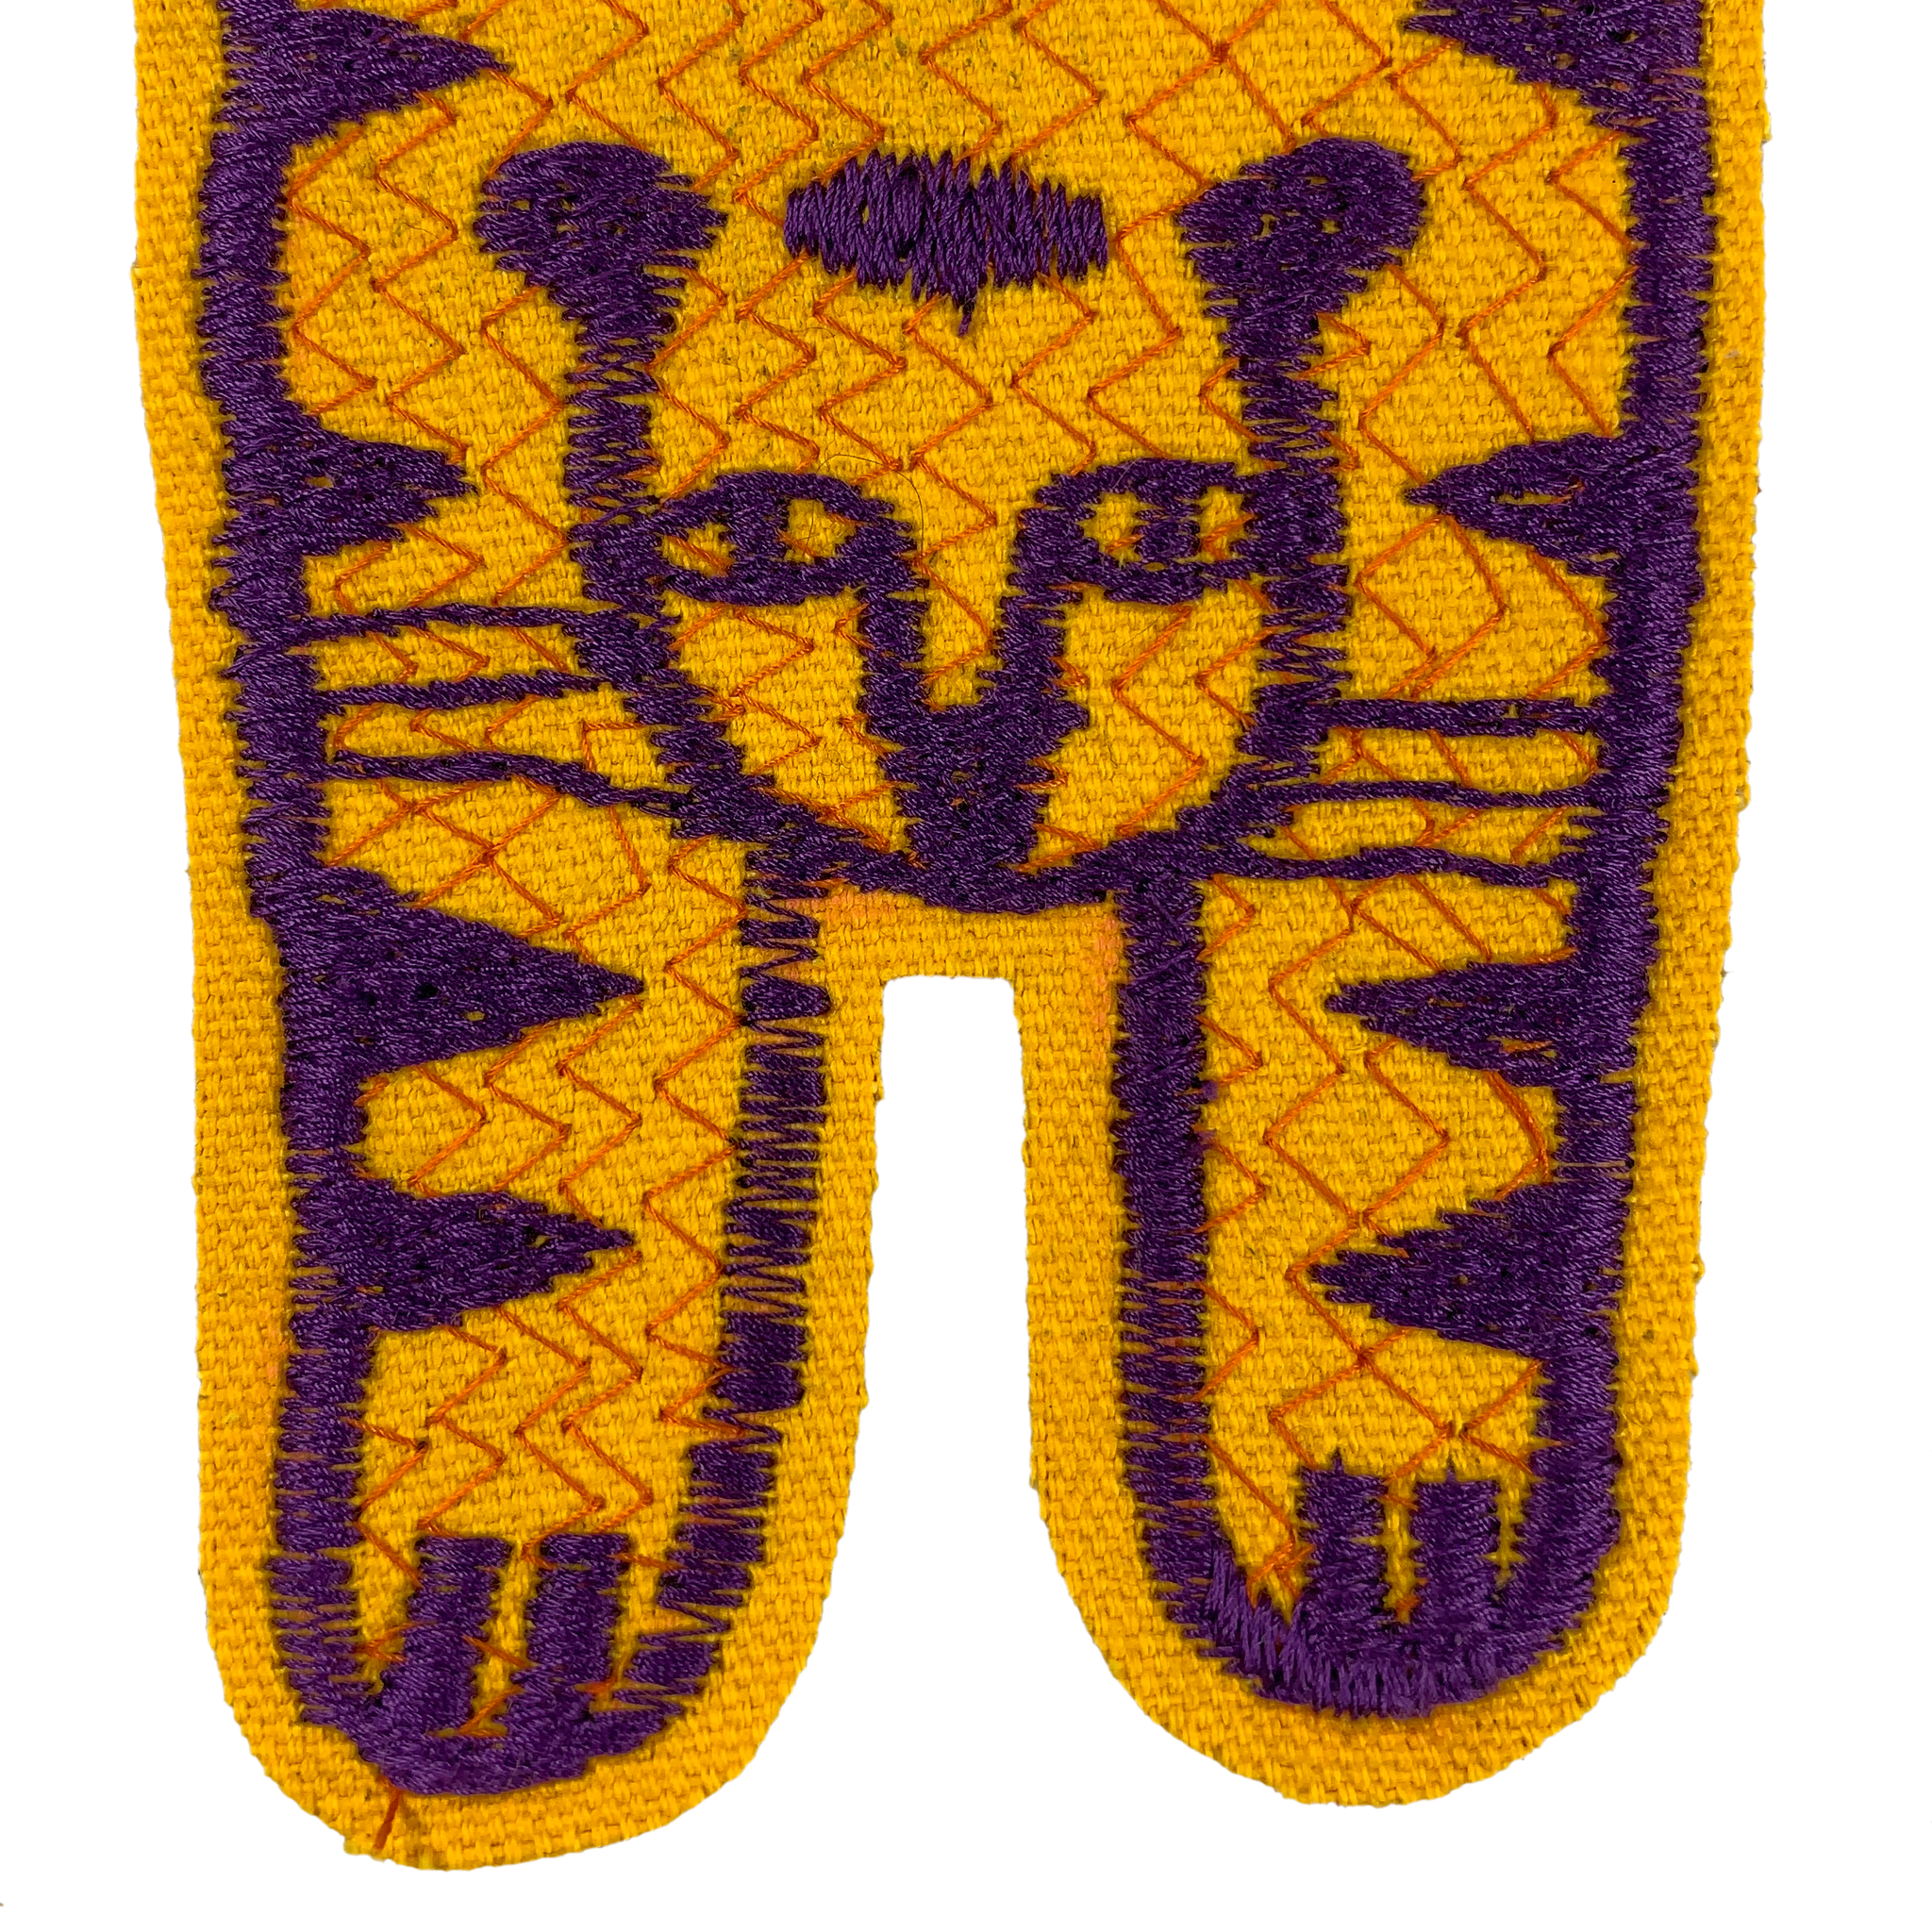 Freehand Embroidered Tiger Patch - PRESALE